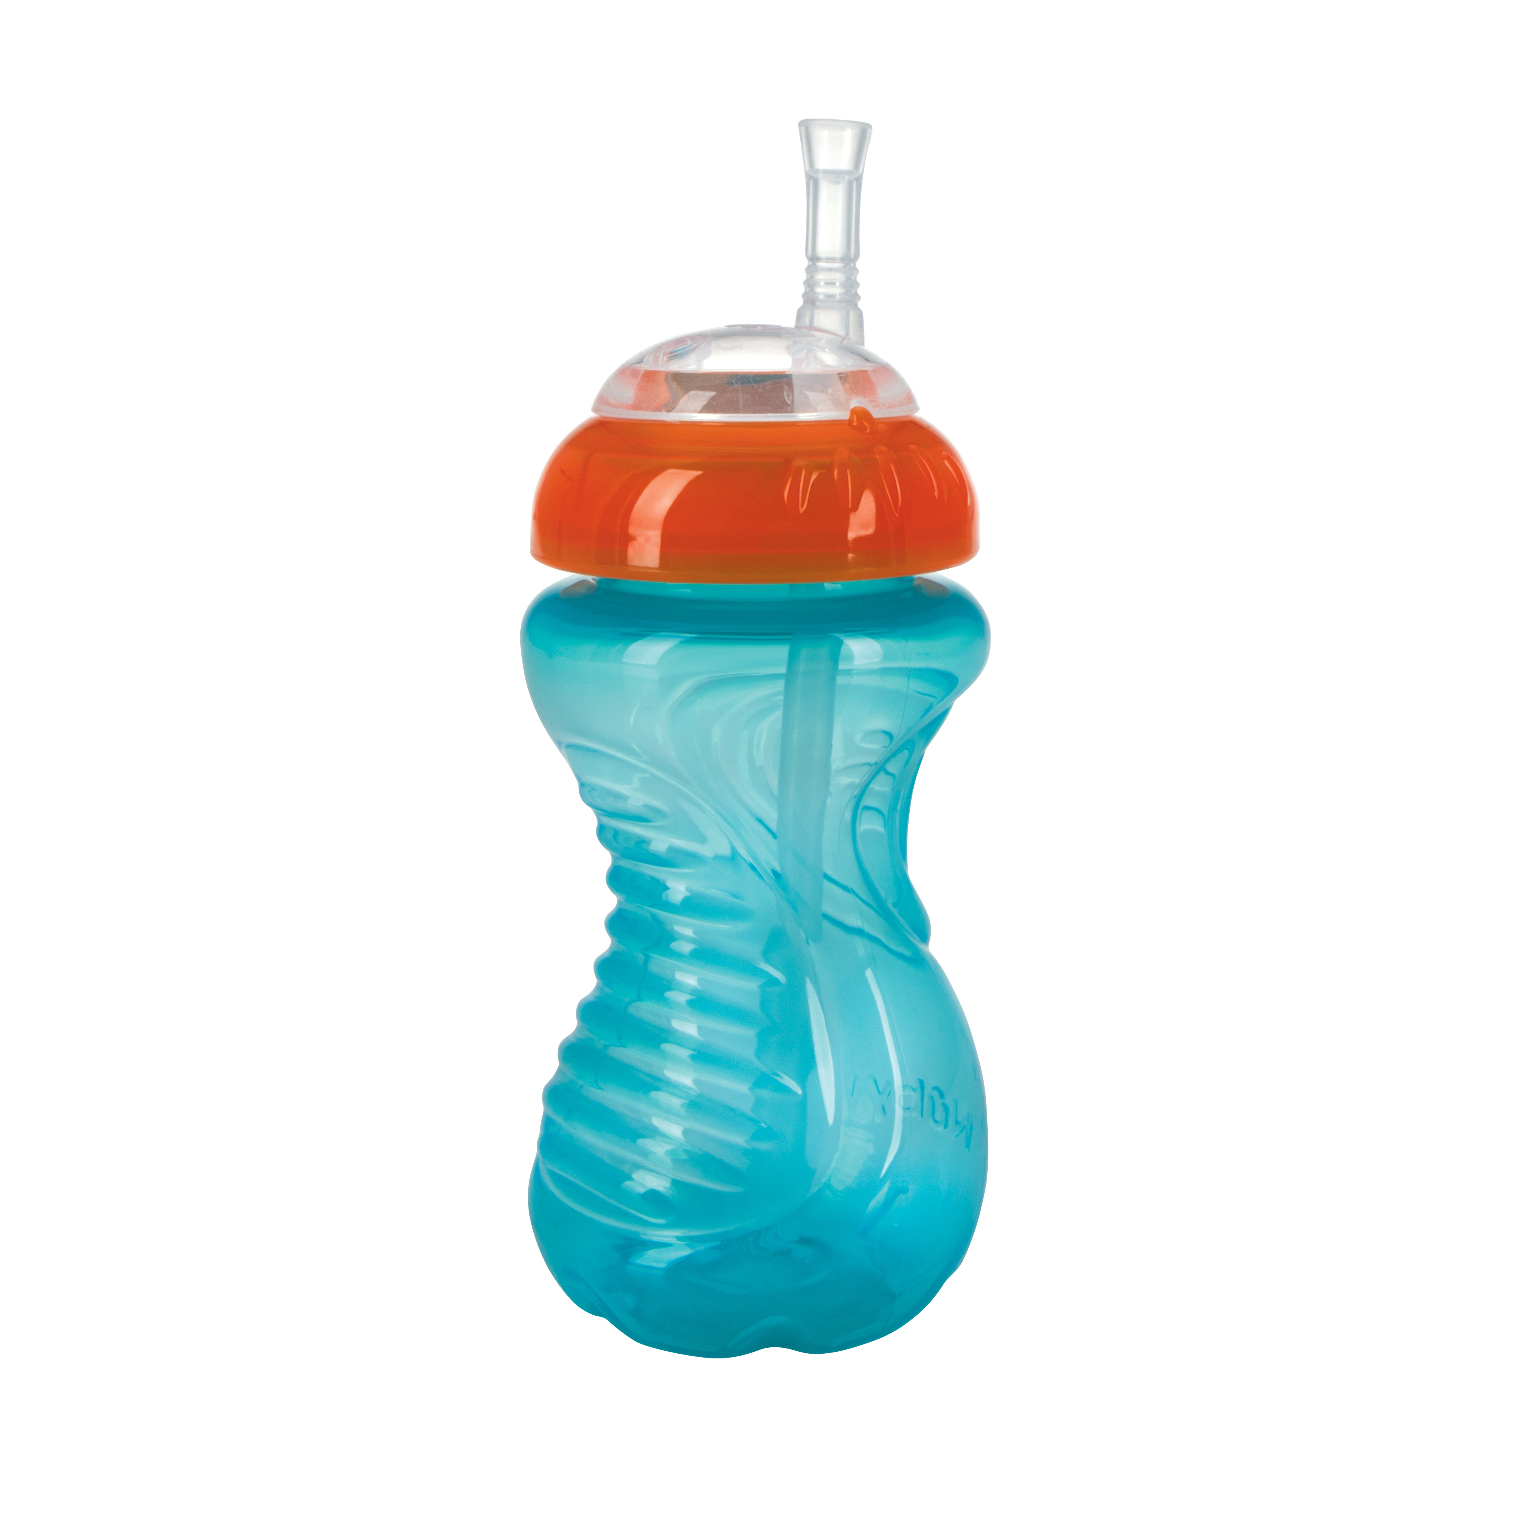 Nuby No Spill Flexi Straw 10 OZ Cup, Assorted Colors, Each